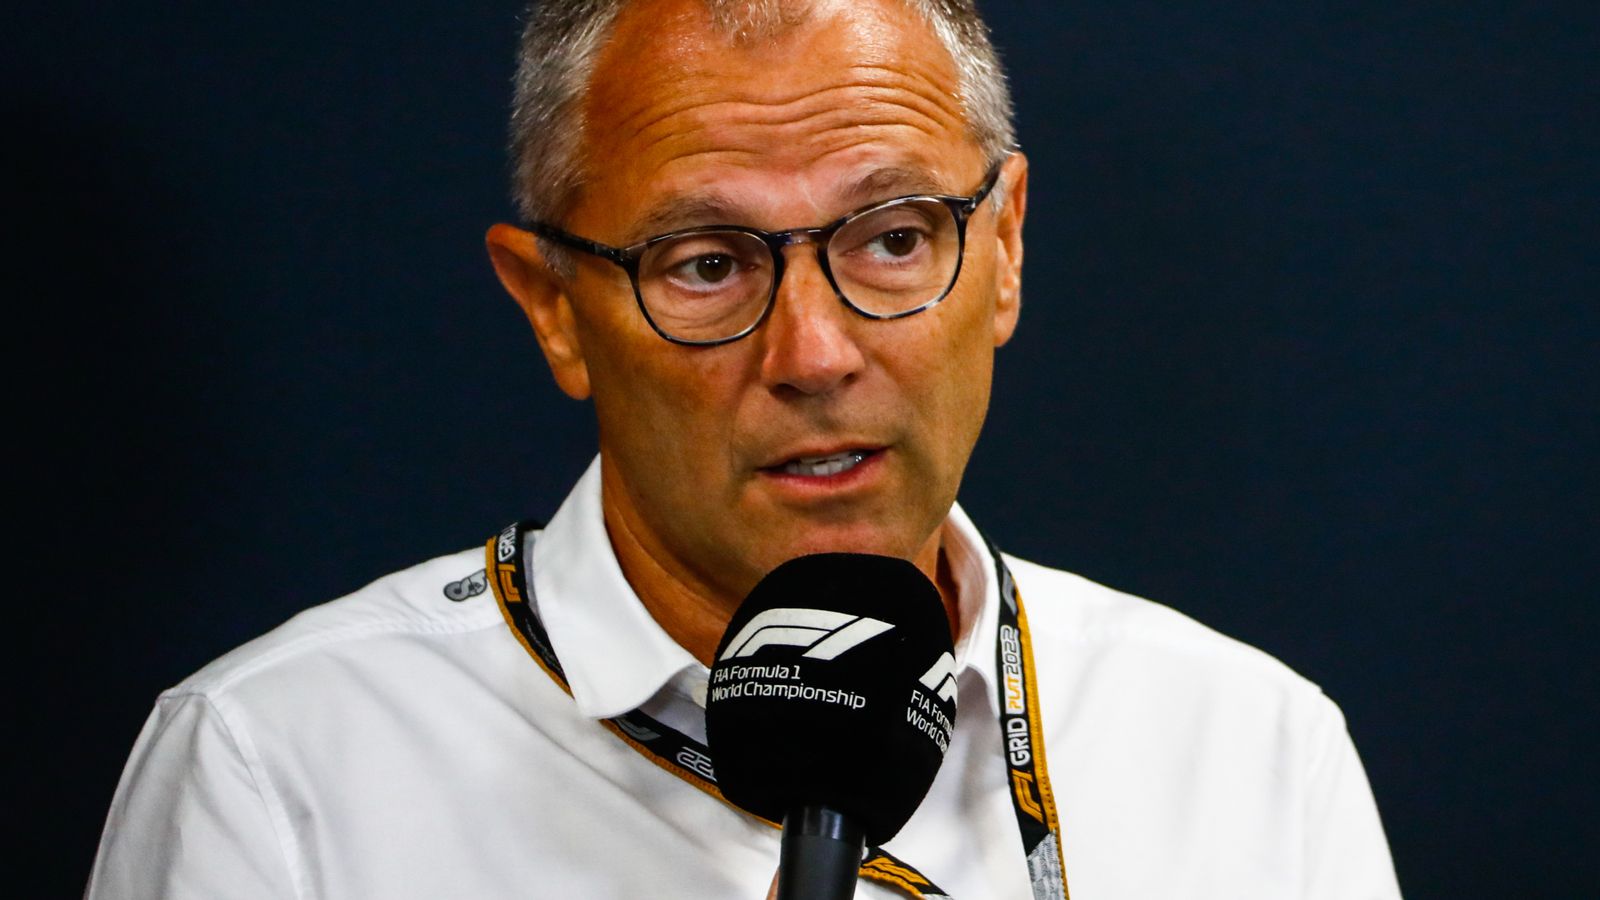 Stefano Domenicali exclusive: Formula 1 boss says Andretti's vocal tactics to join F1 'not smart' | F1 News